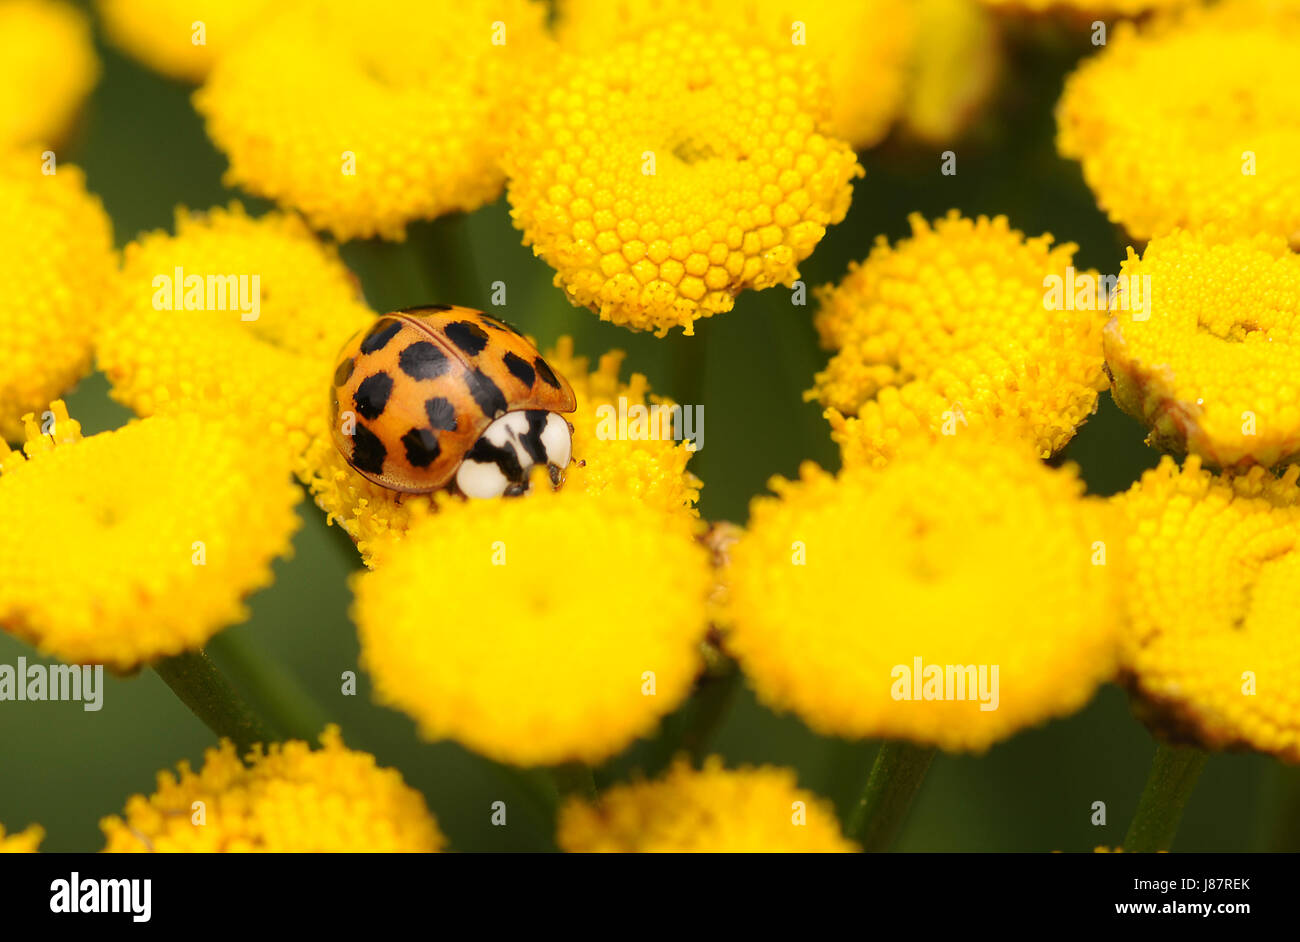 beetle, asiatic, dots, spotted, yellow, ladybug, insect, bloom, blossom, Stock Photo